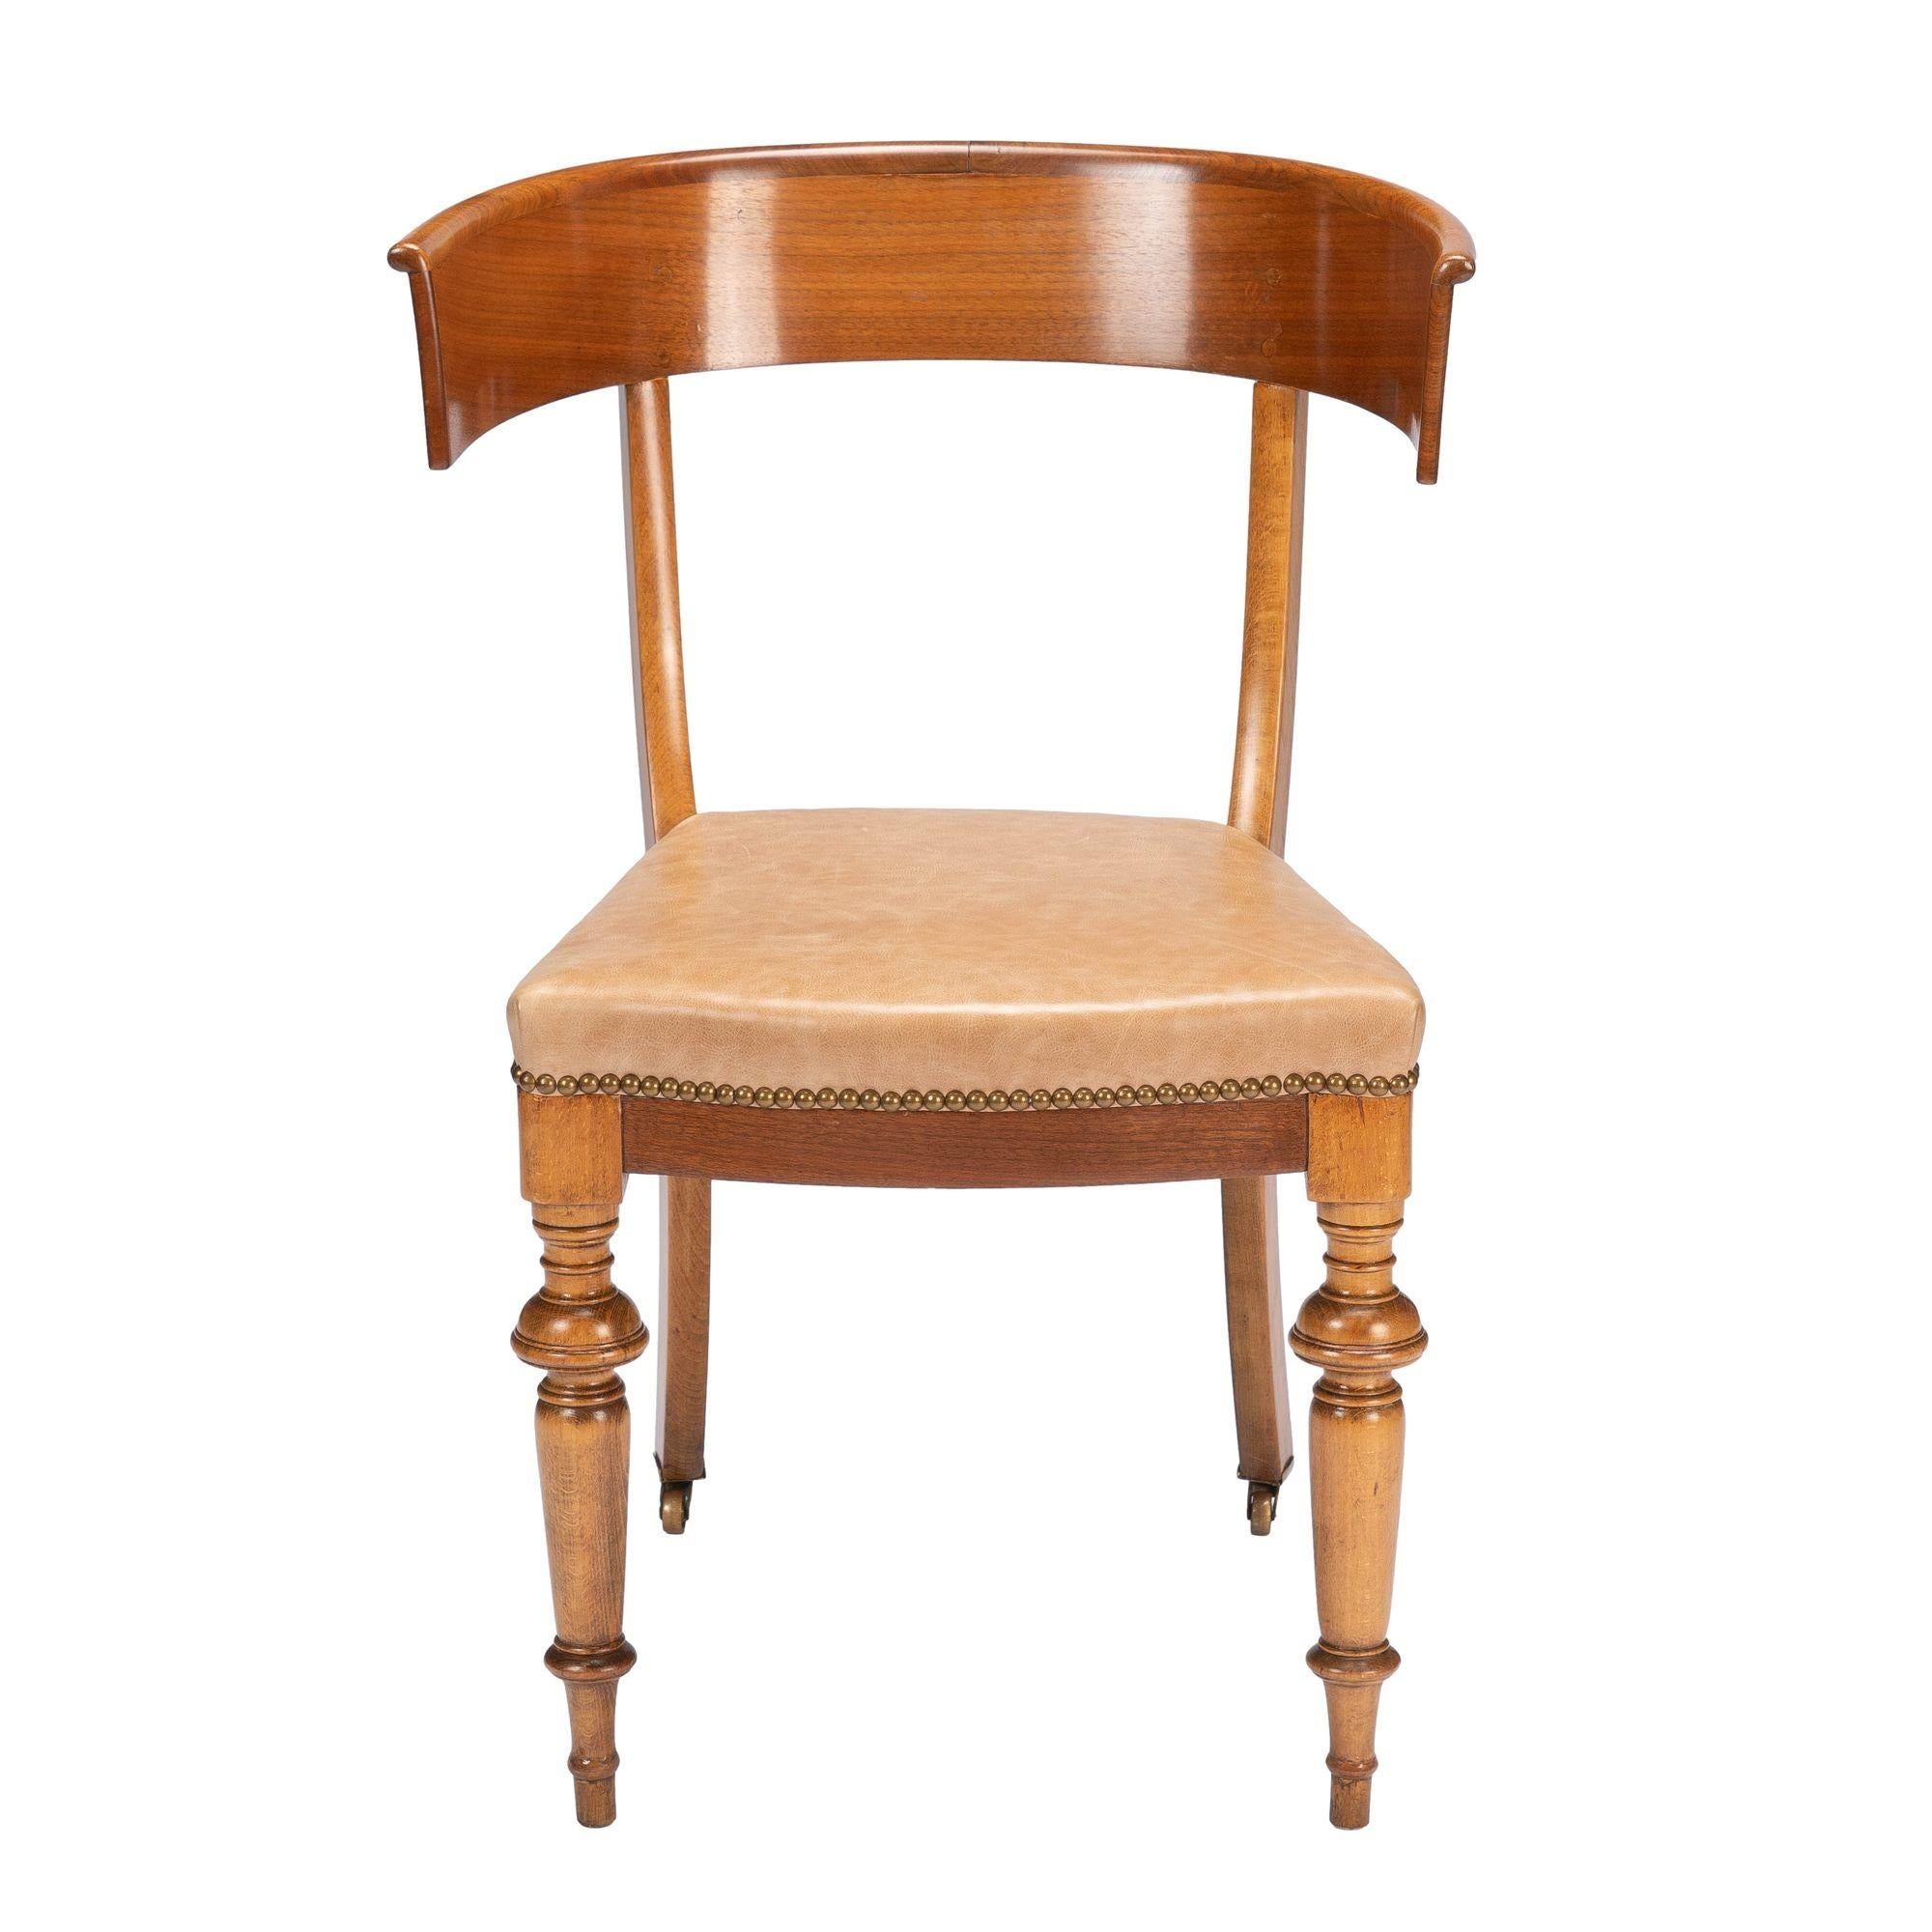 Biedermeier Klismos side chair of European beechwood and mahogany veneers. The seat is upholstered in Italian oil tanned leather with brass round head tacks. The front legs are turned to spike feet and the rear legs are sabre cut on brass castors.